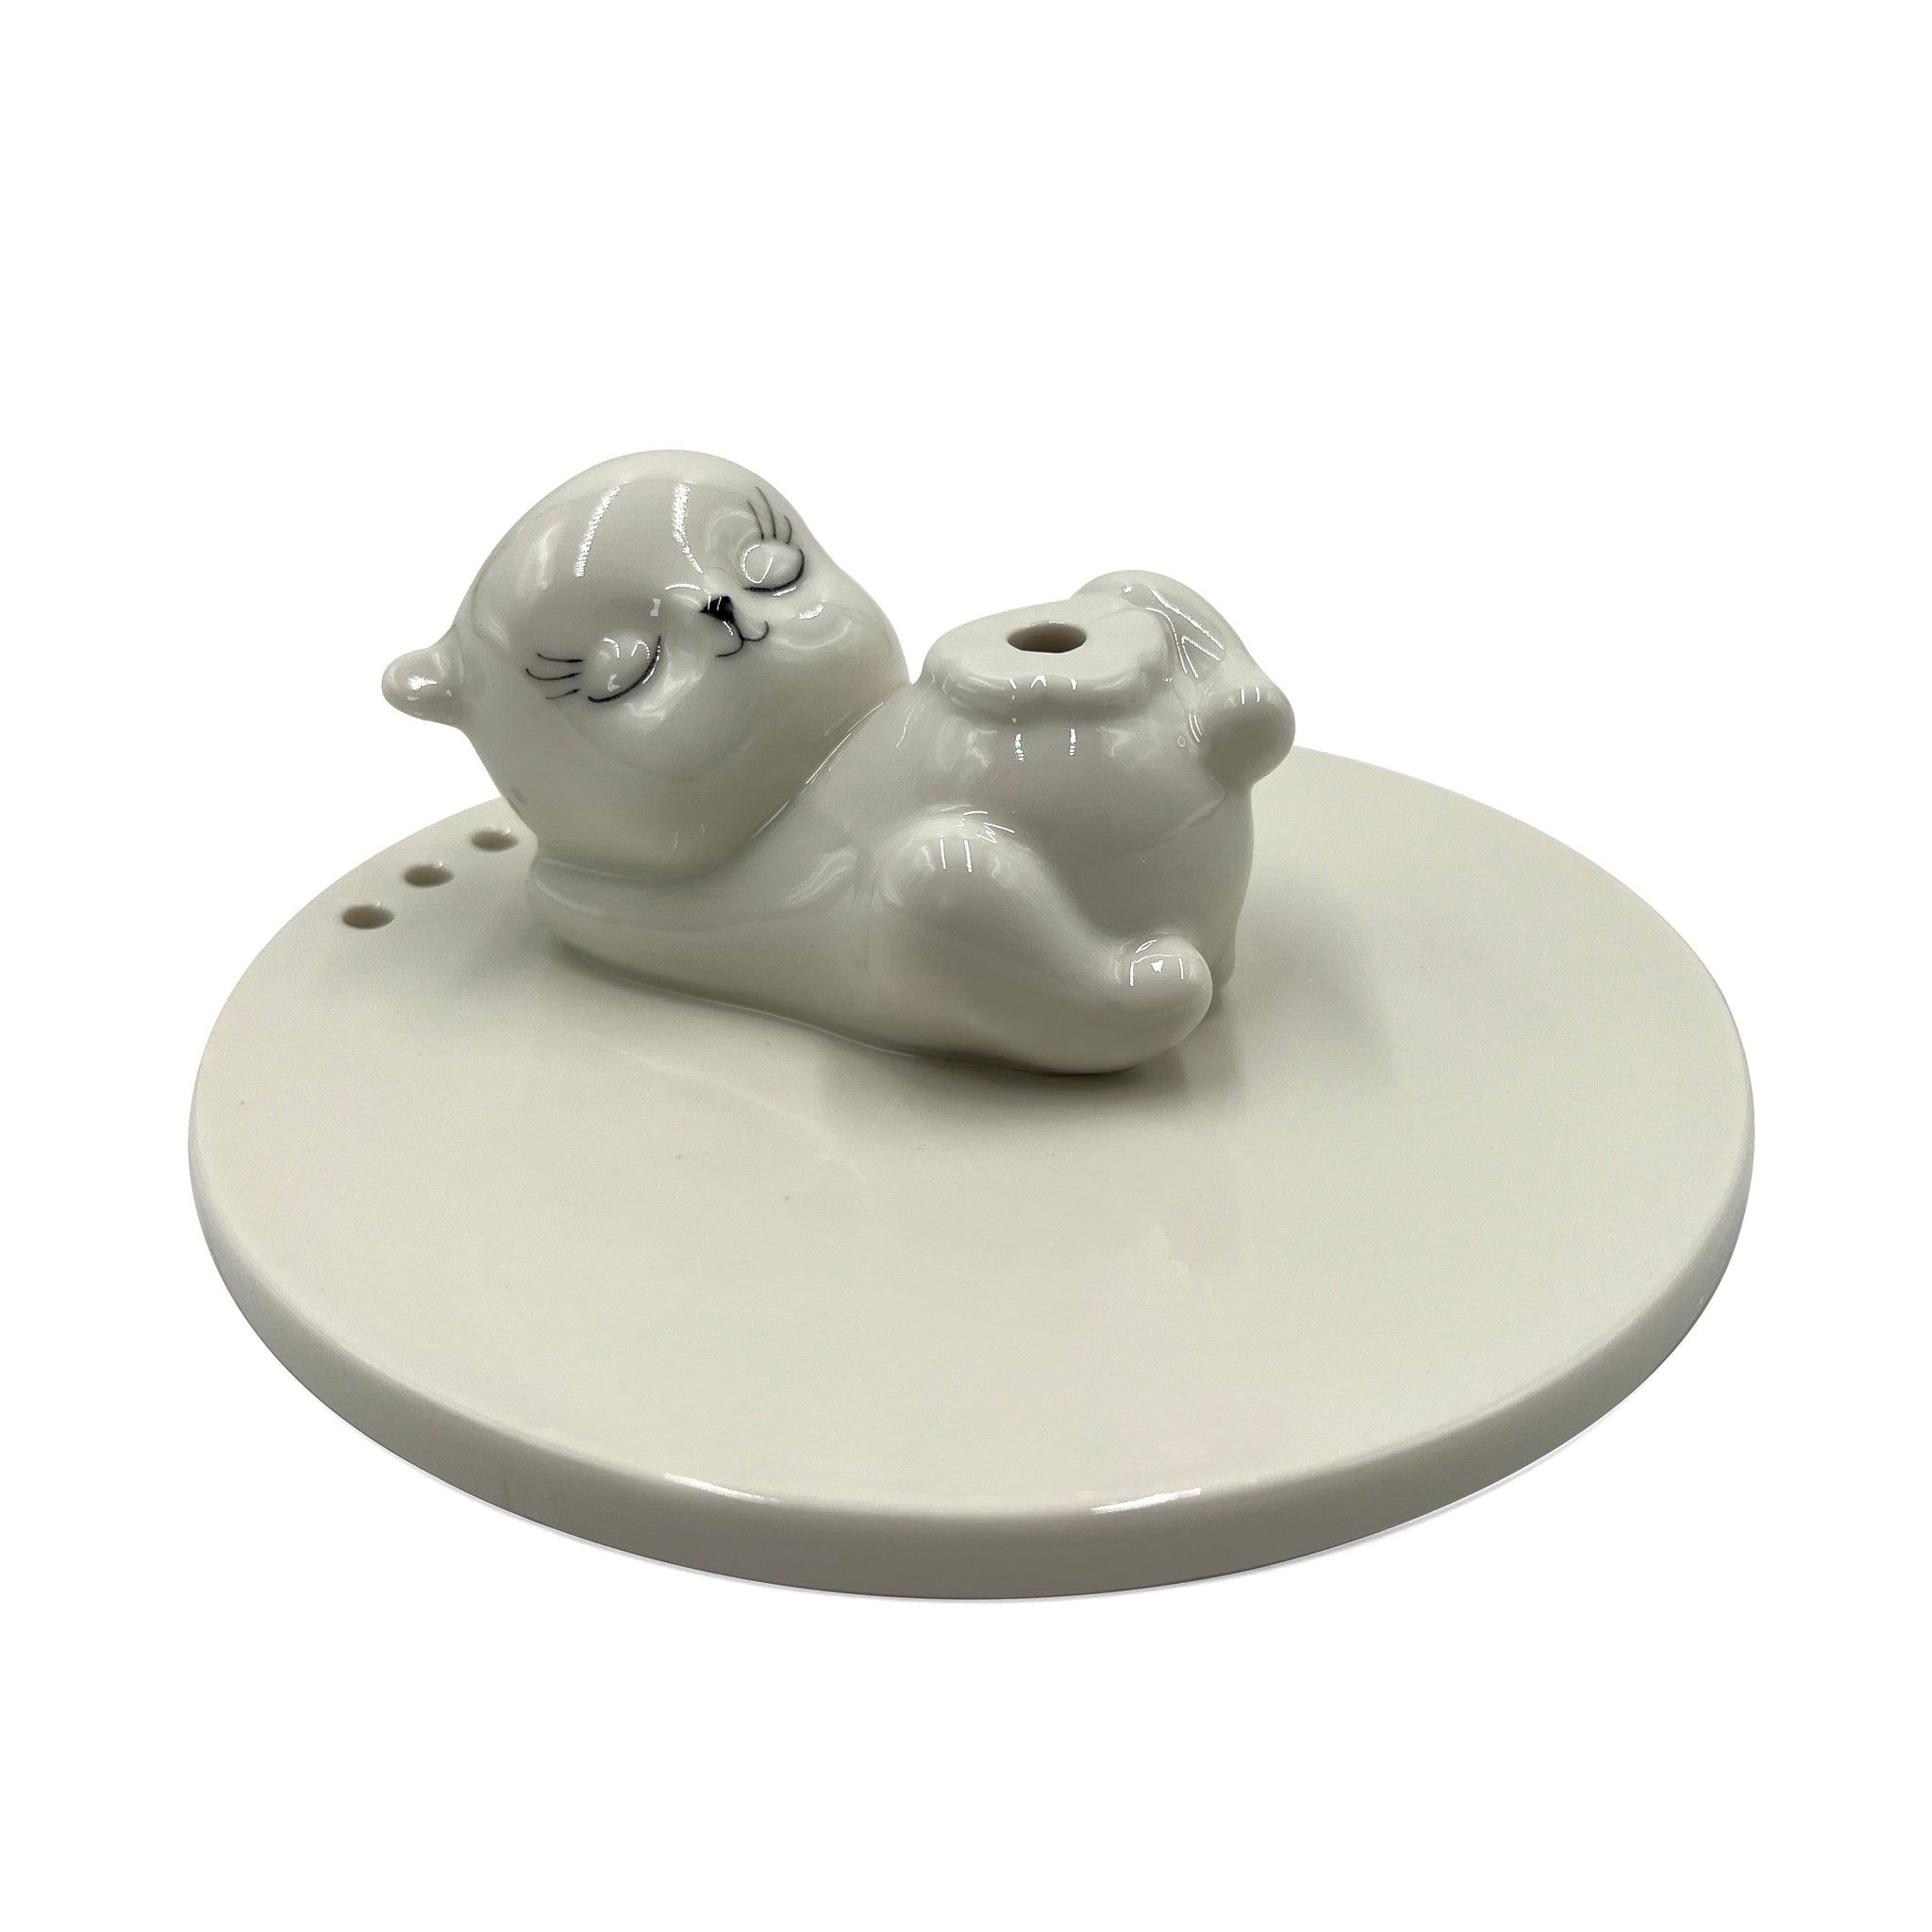 Kitty Ceramic Top for Ceramic Pet Fountains